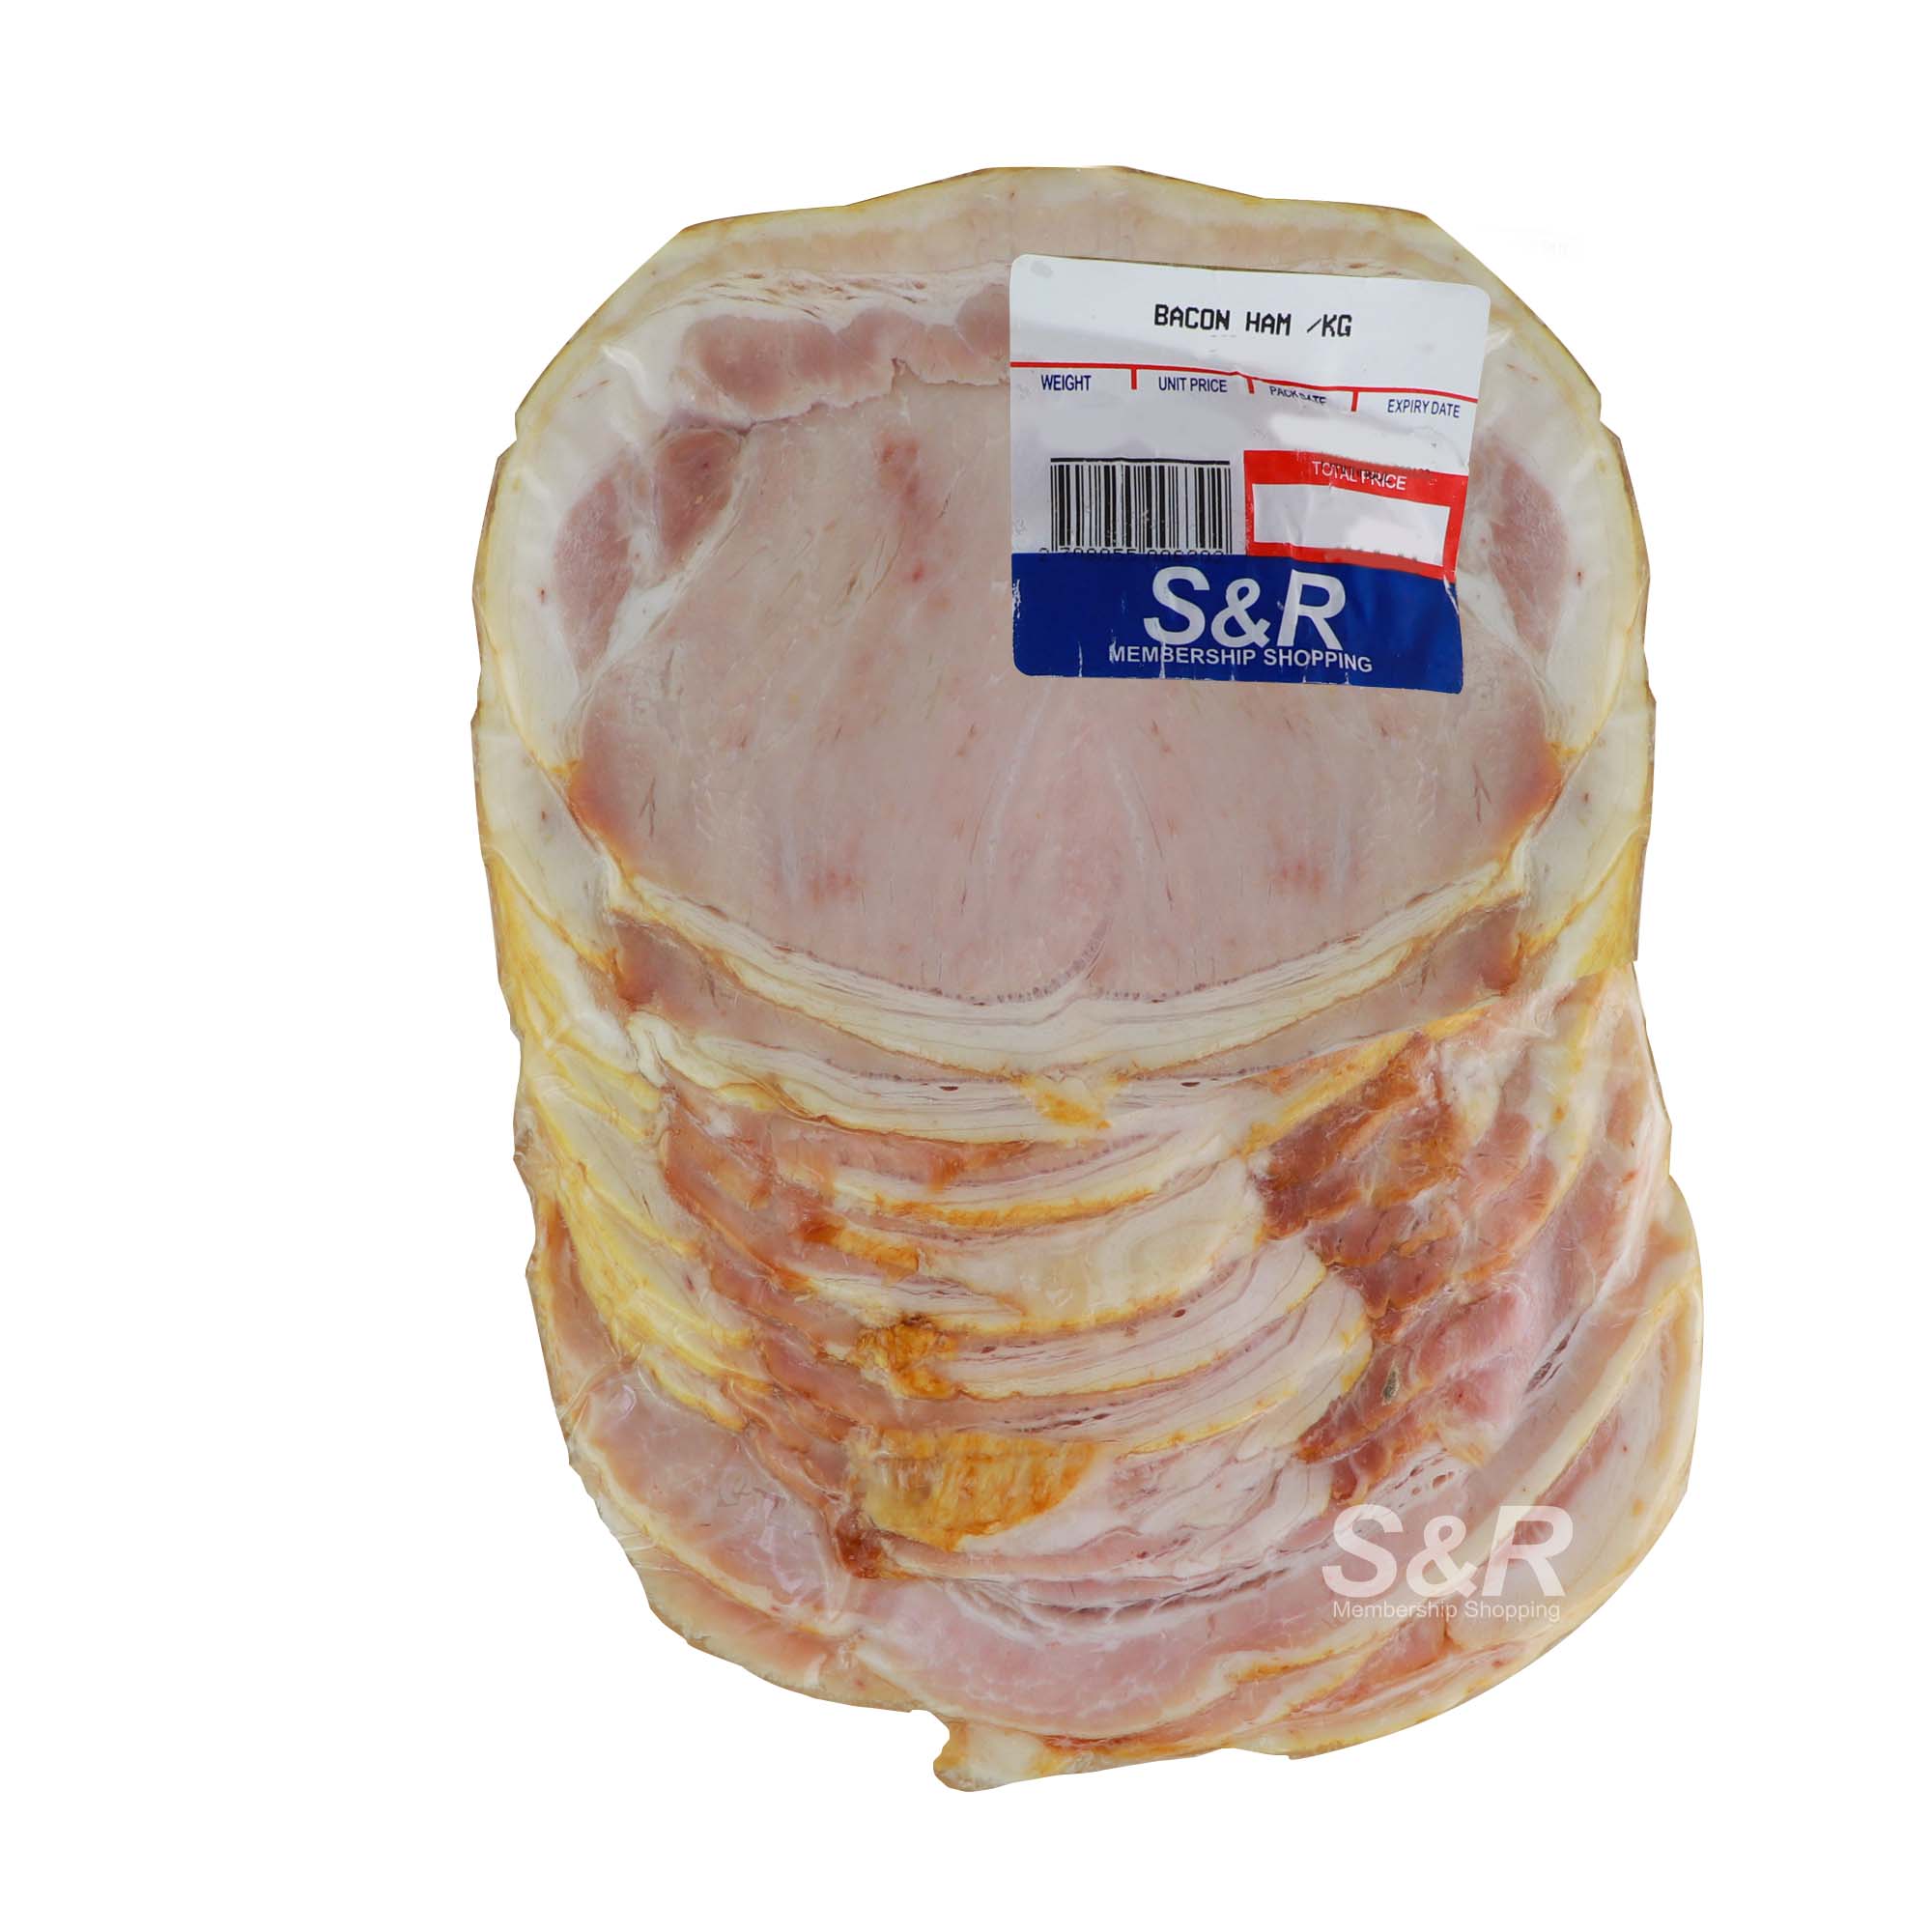 S&R Bacon Ham approx. 650g